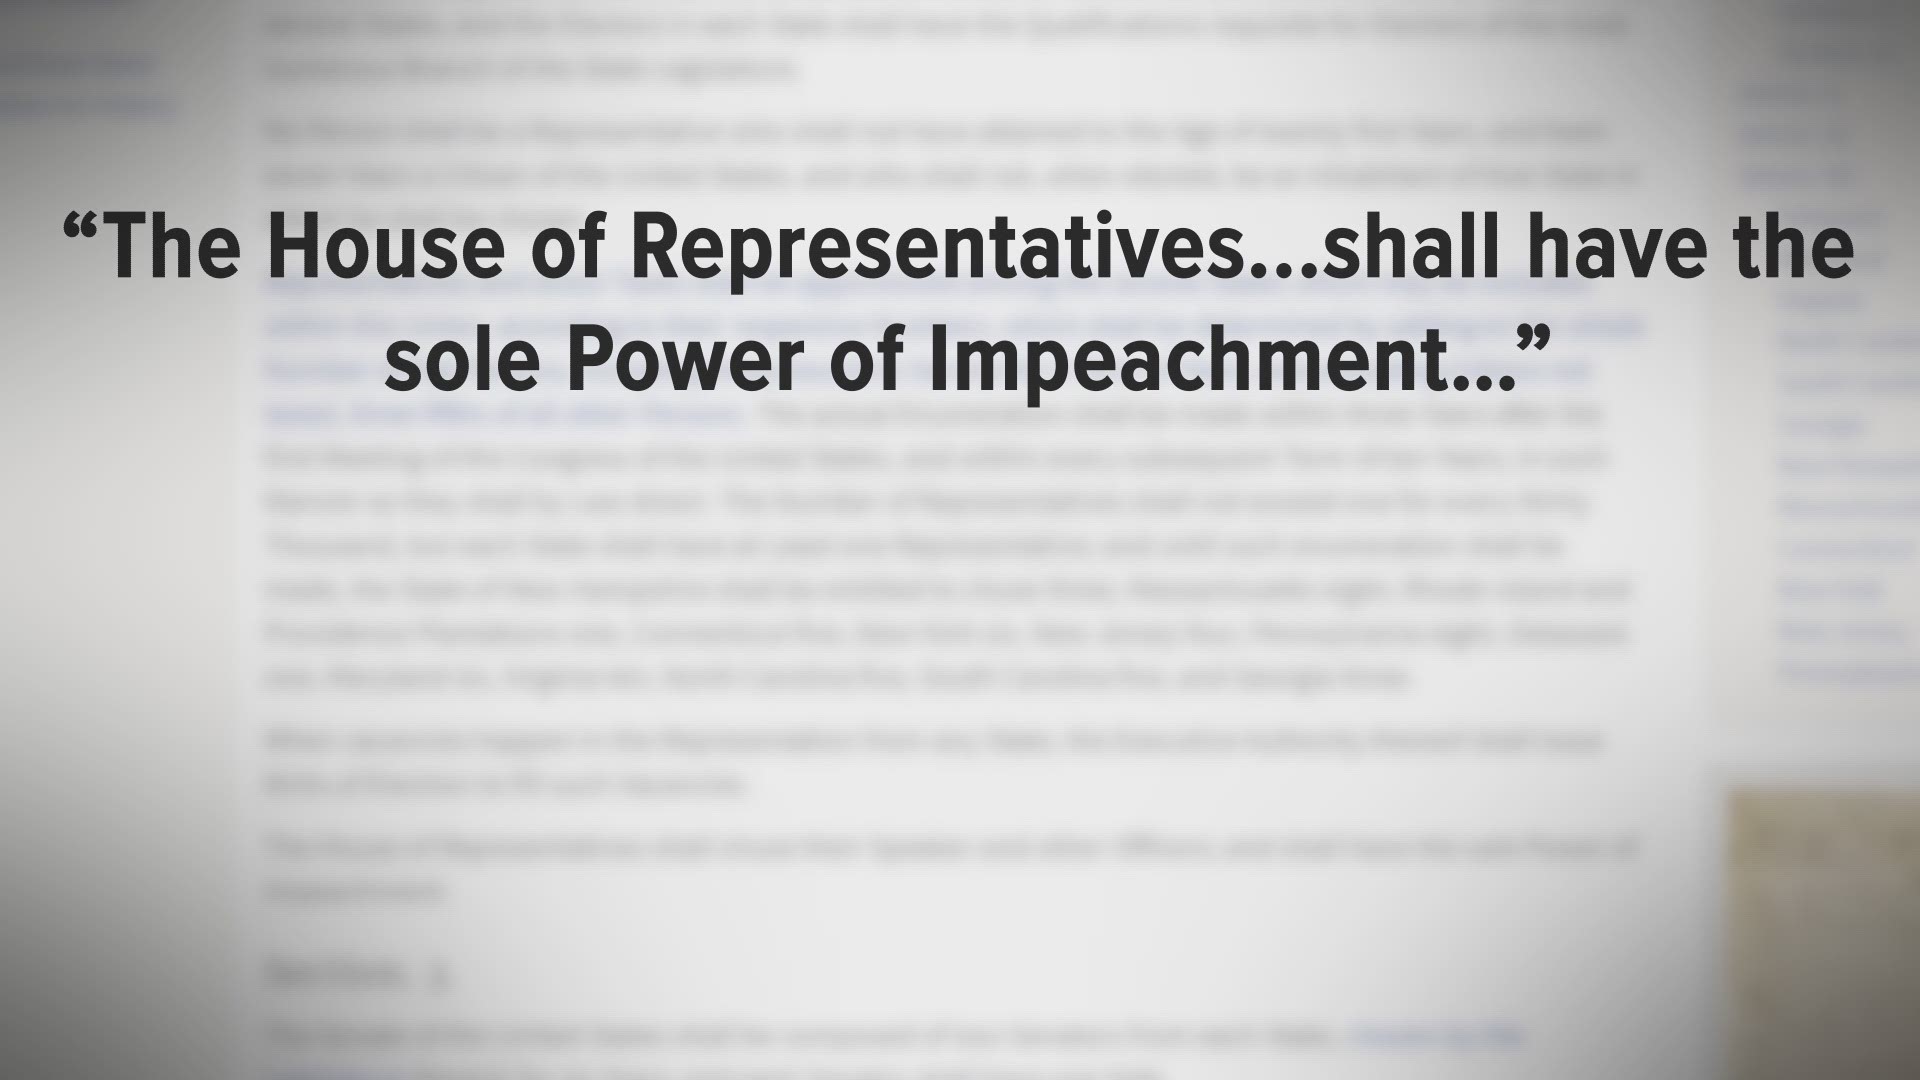 It's simple, right? The House impeaches a president, the Senate holds the trial... Well, NO. It's not that simple. There's a lot more debate first.